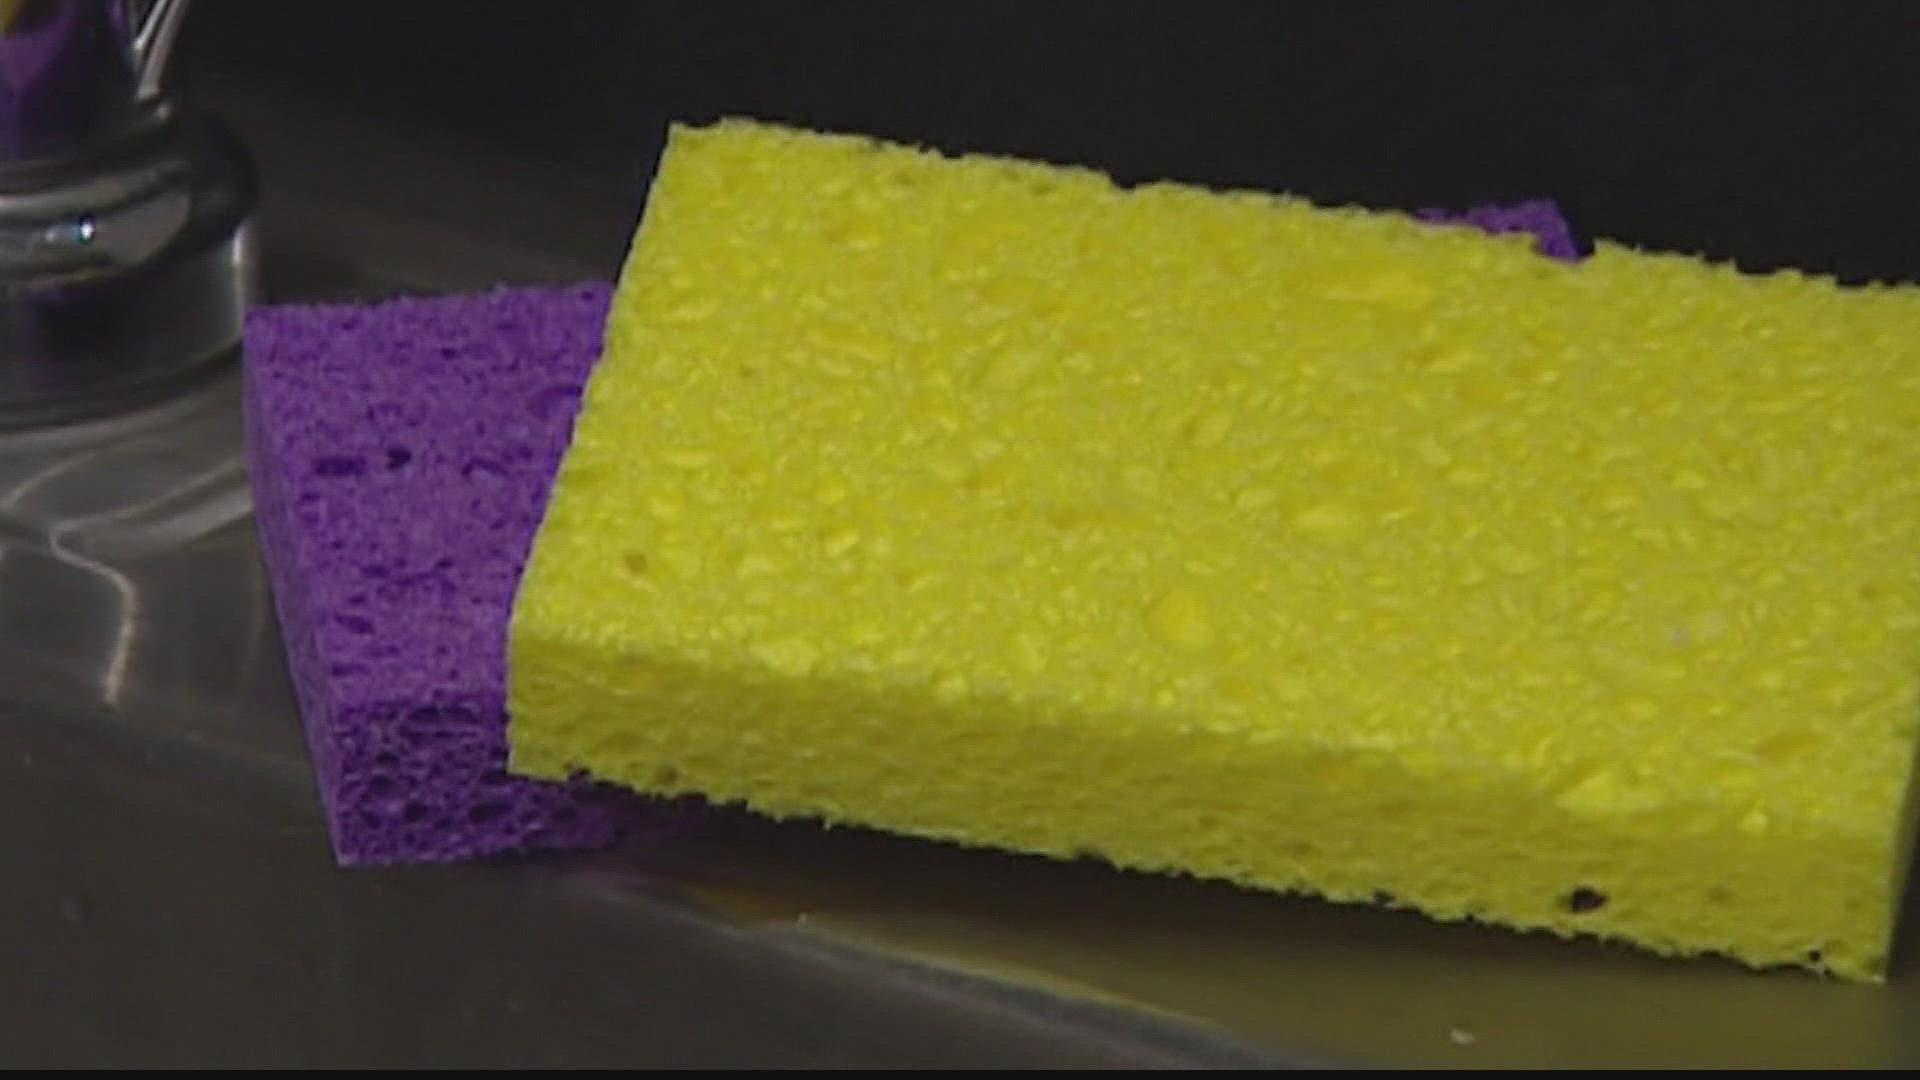 Why a dish sponge may hinder your cleaning: study